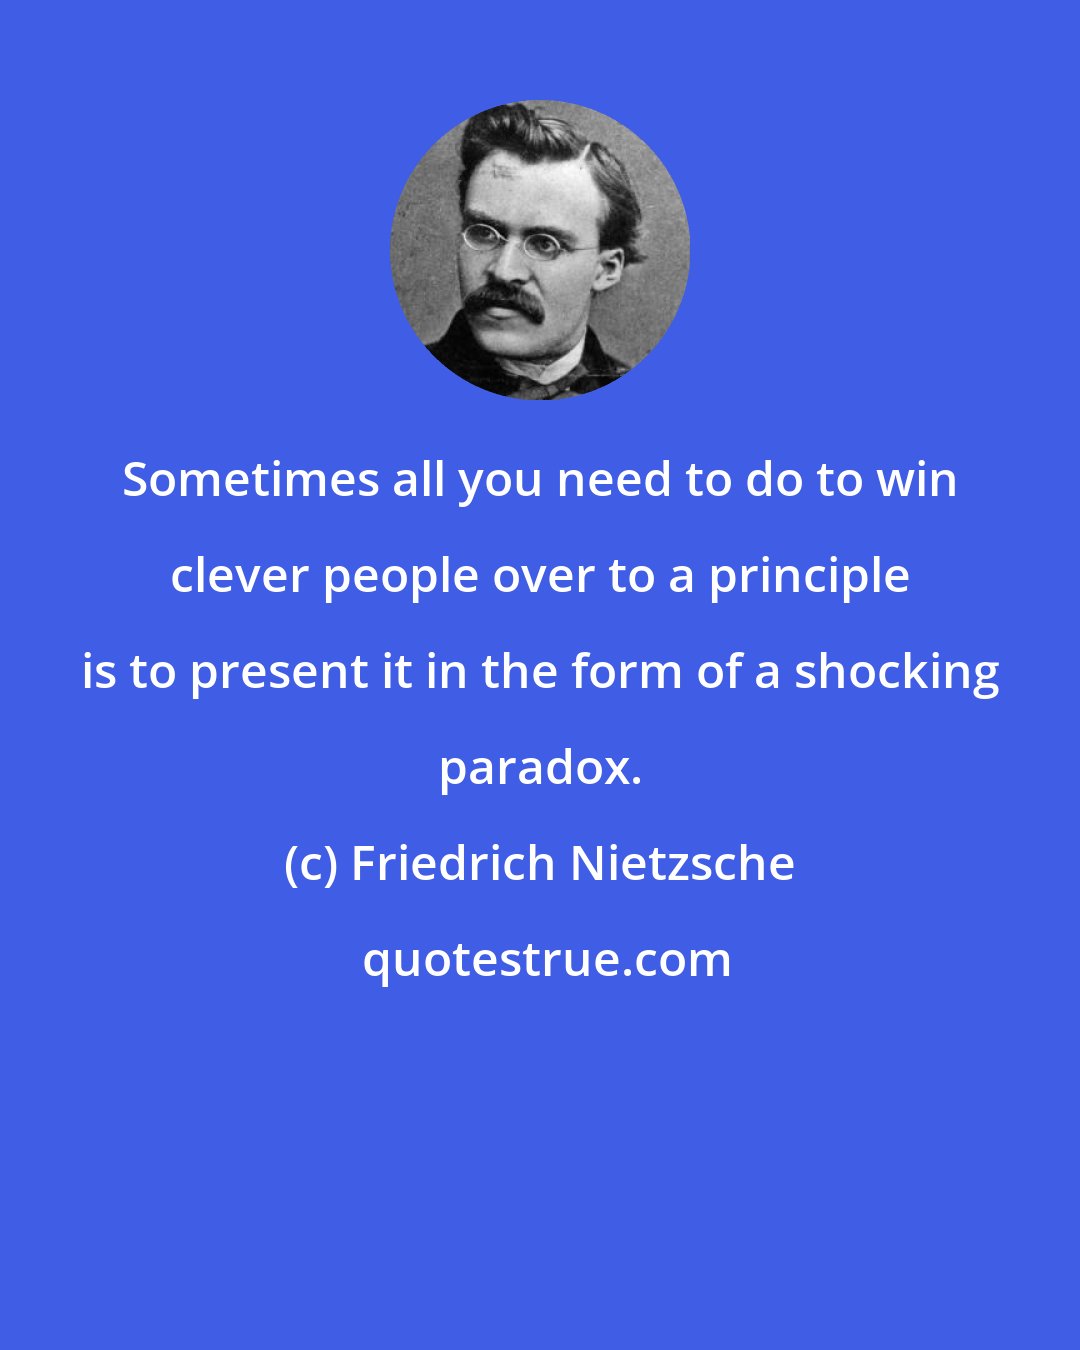 Friedrich Nietzsche: Sometimes all you need to do to win clever people over to a principle is to present it in the form of a shocking paradox.